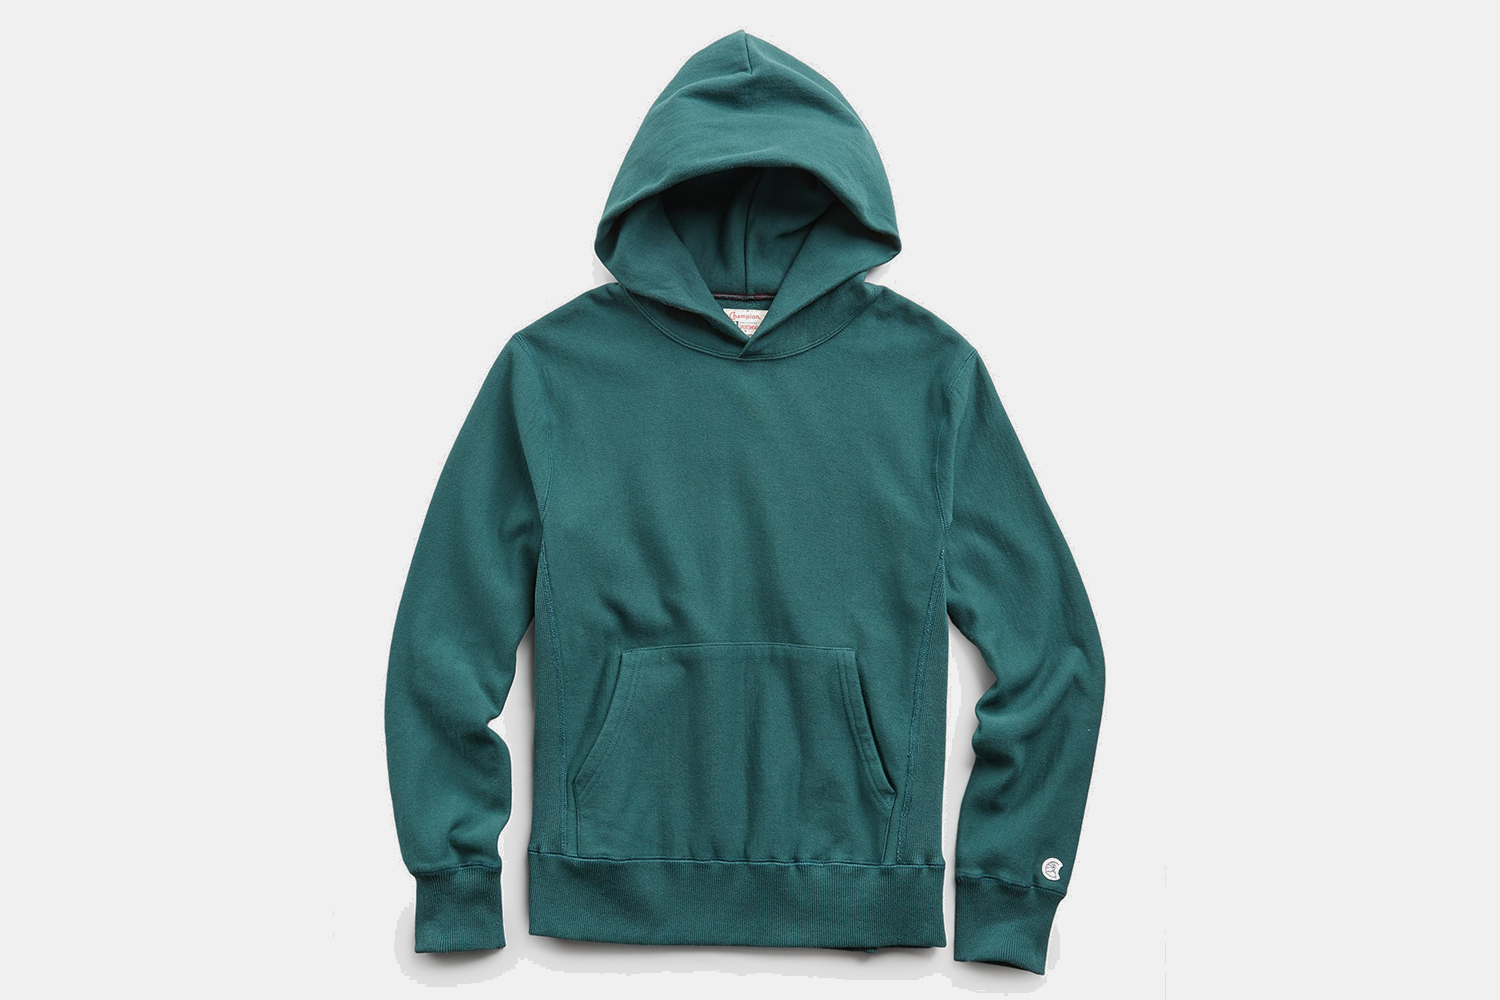 Deal: The Ultimate WFH Hoodie Is 50% Off